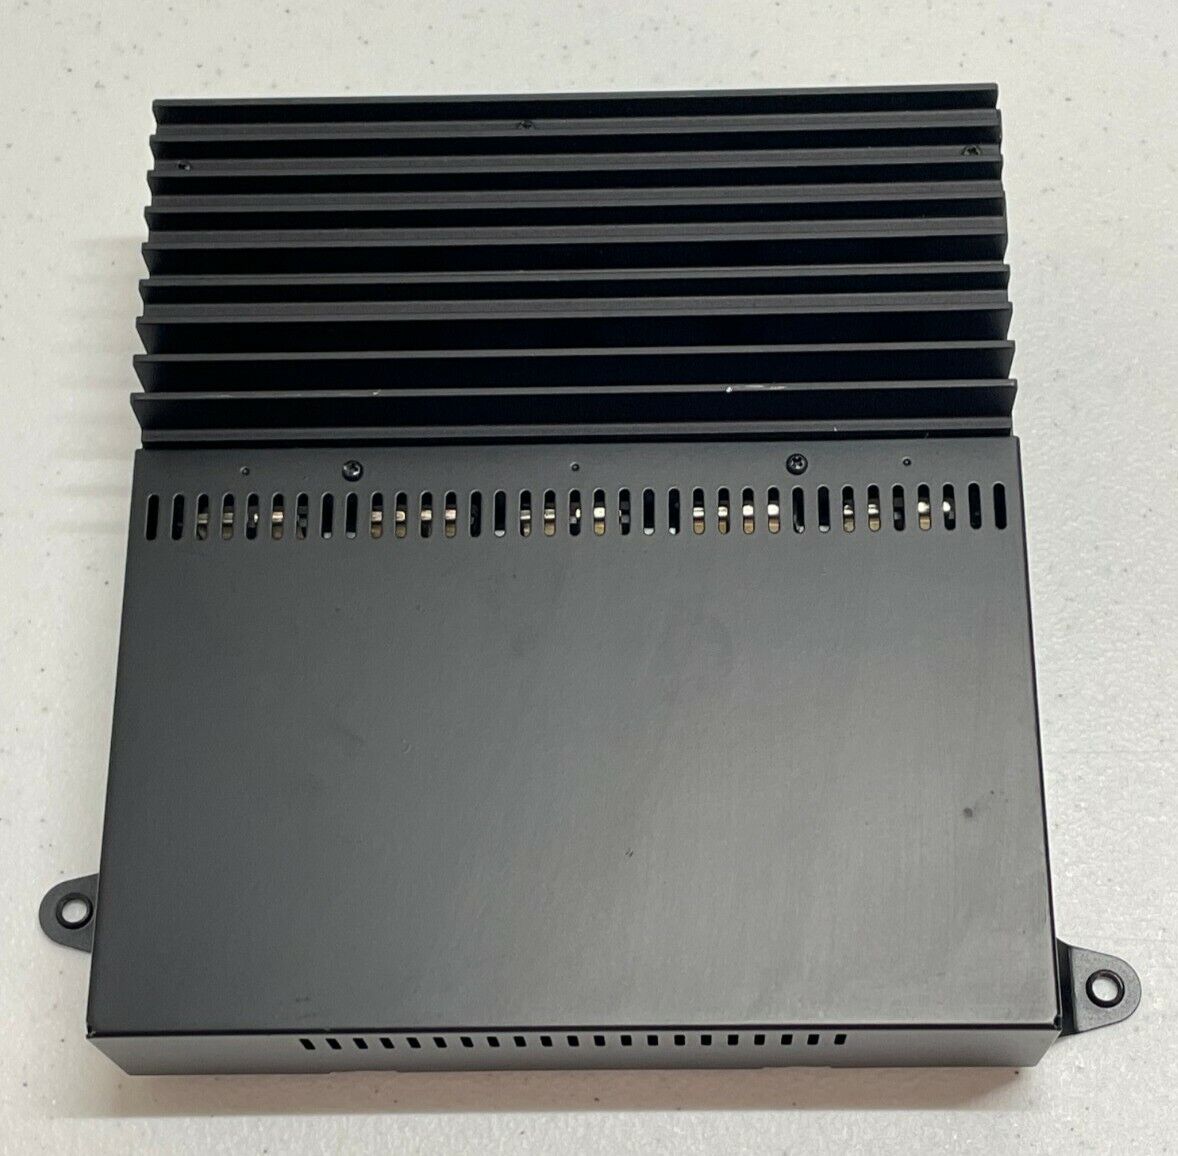 TESTED 2000-2006 BMW E53 X5 series AUDIO STEREO AMPLIFIER  65.12